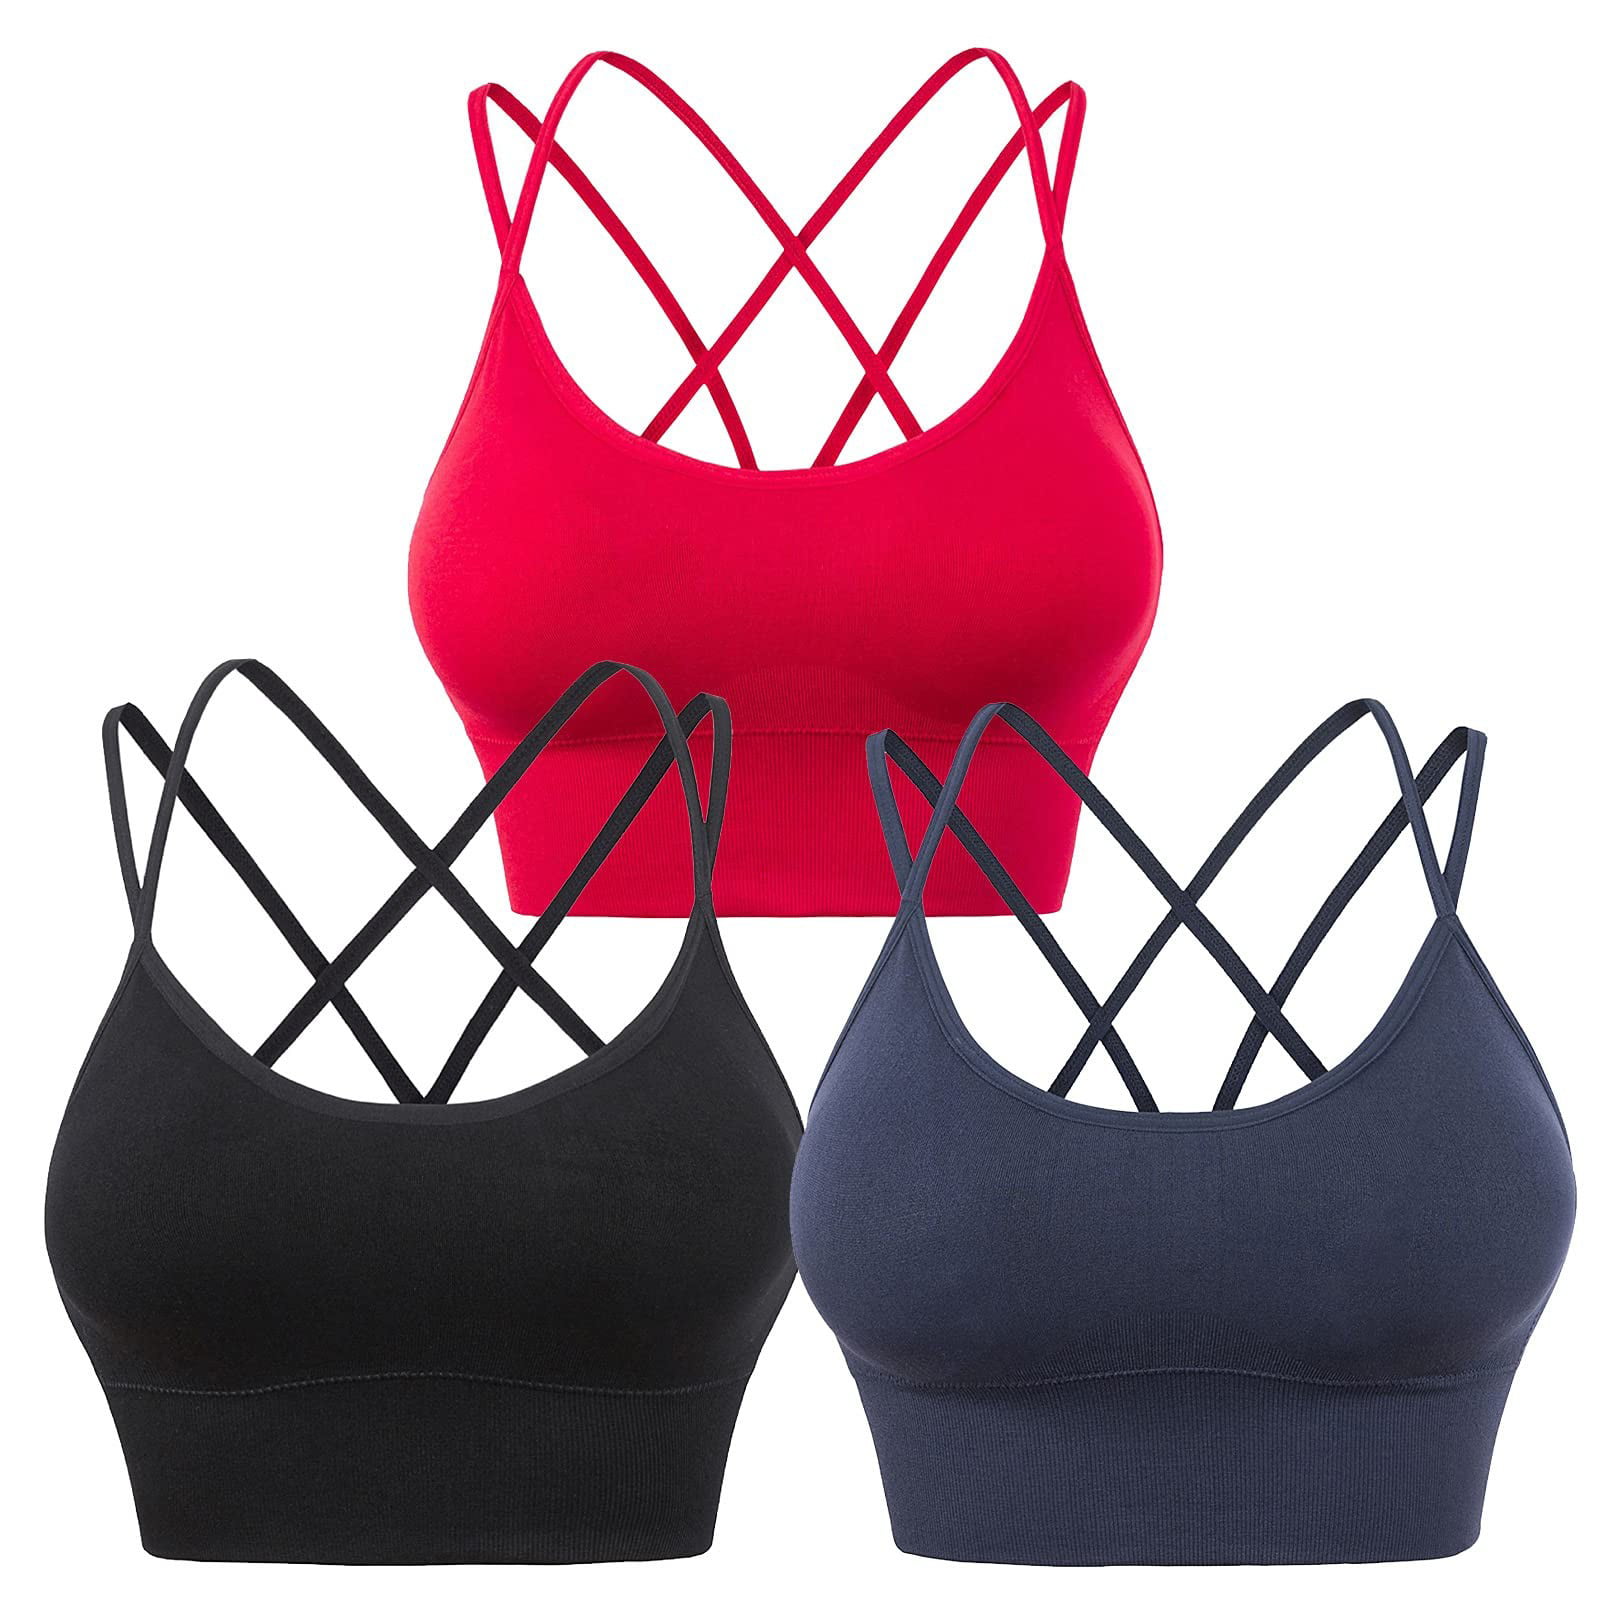 Pimfylm Plus Size Lingerie For Women Naughty Strappy Yoga Sports